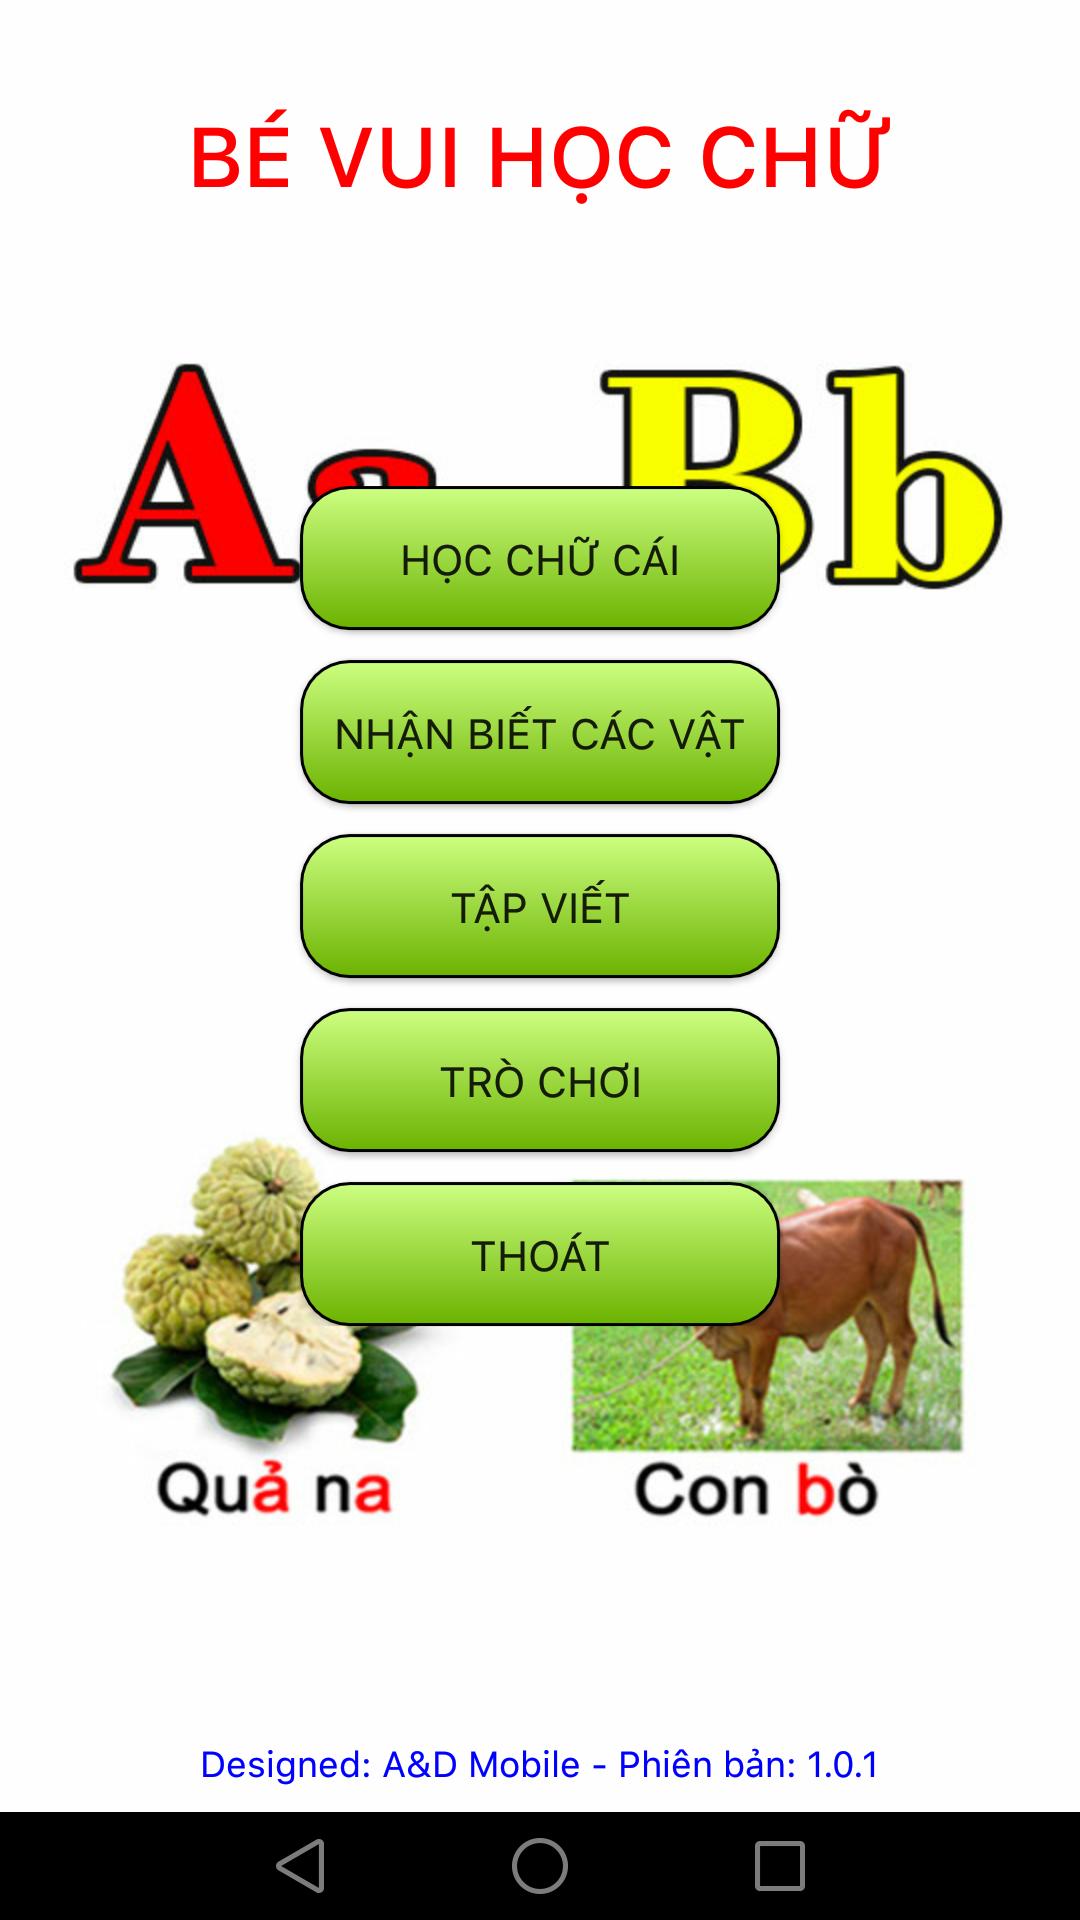 Bé vui học chữ for Android - APK Download